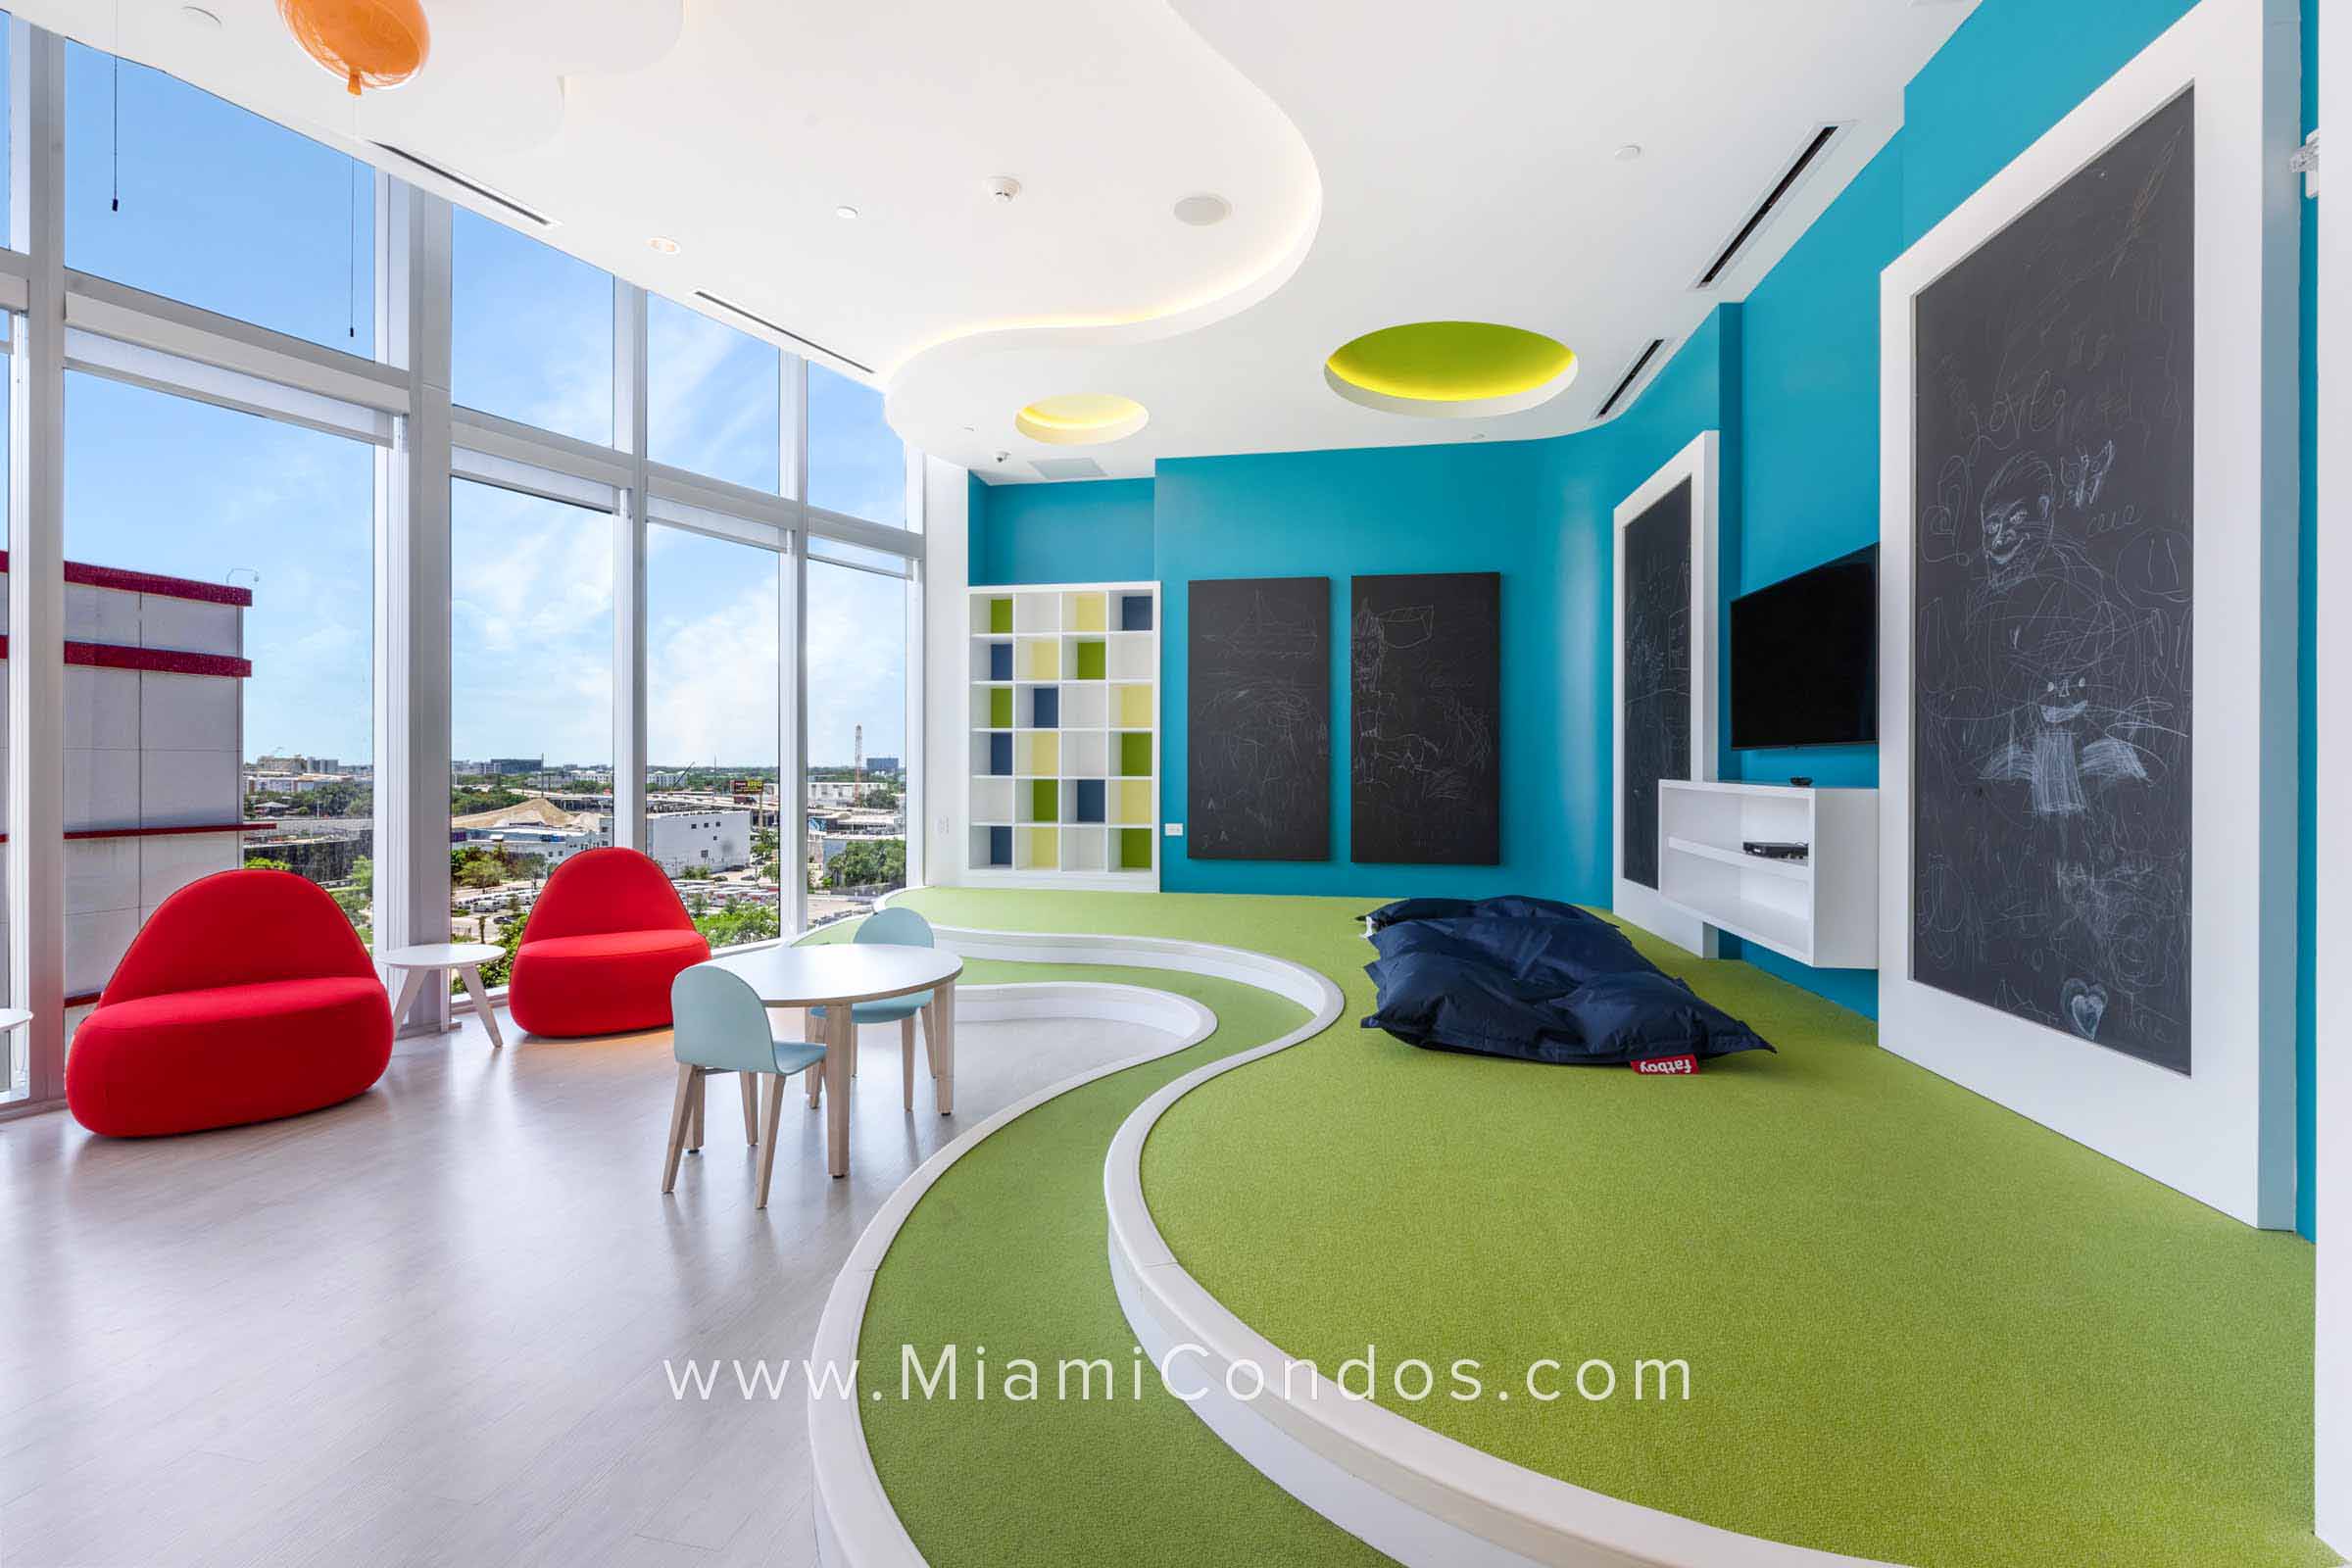 Paramount Miami Worldcenter Kid's Play Room